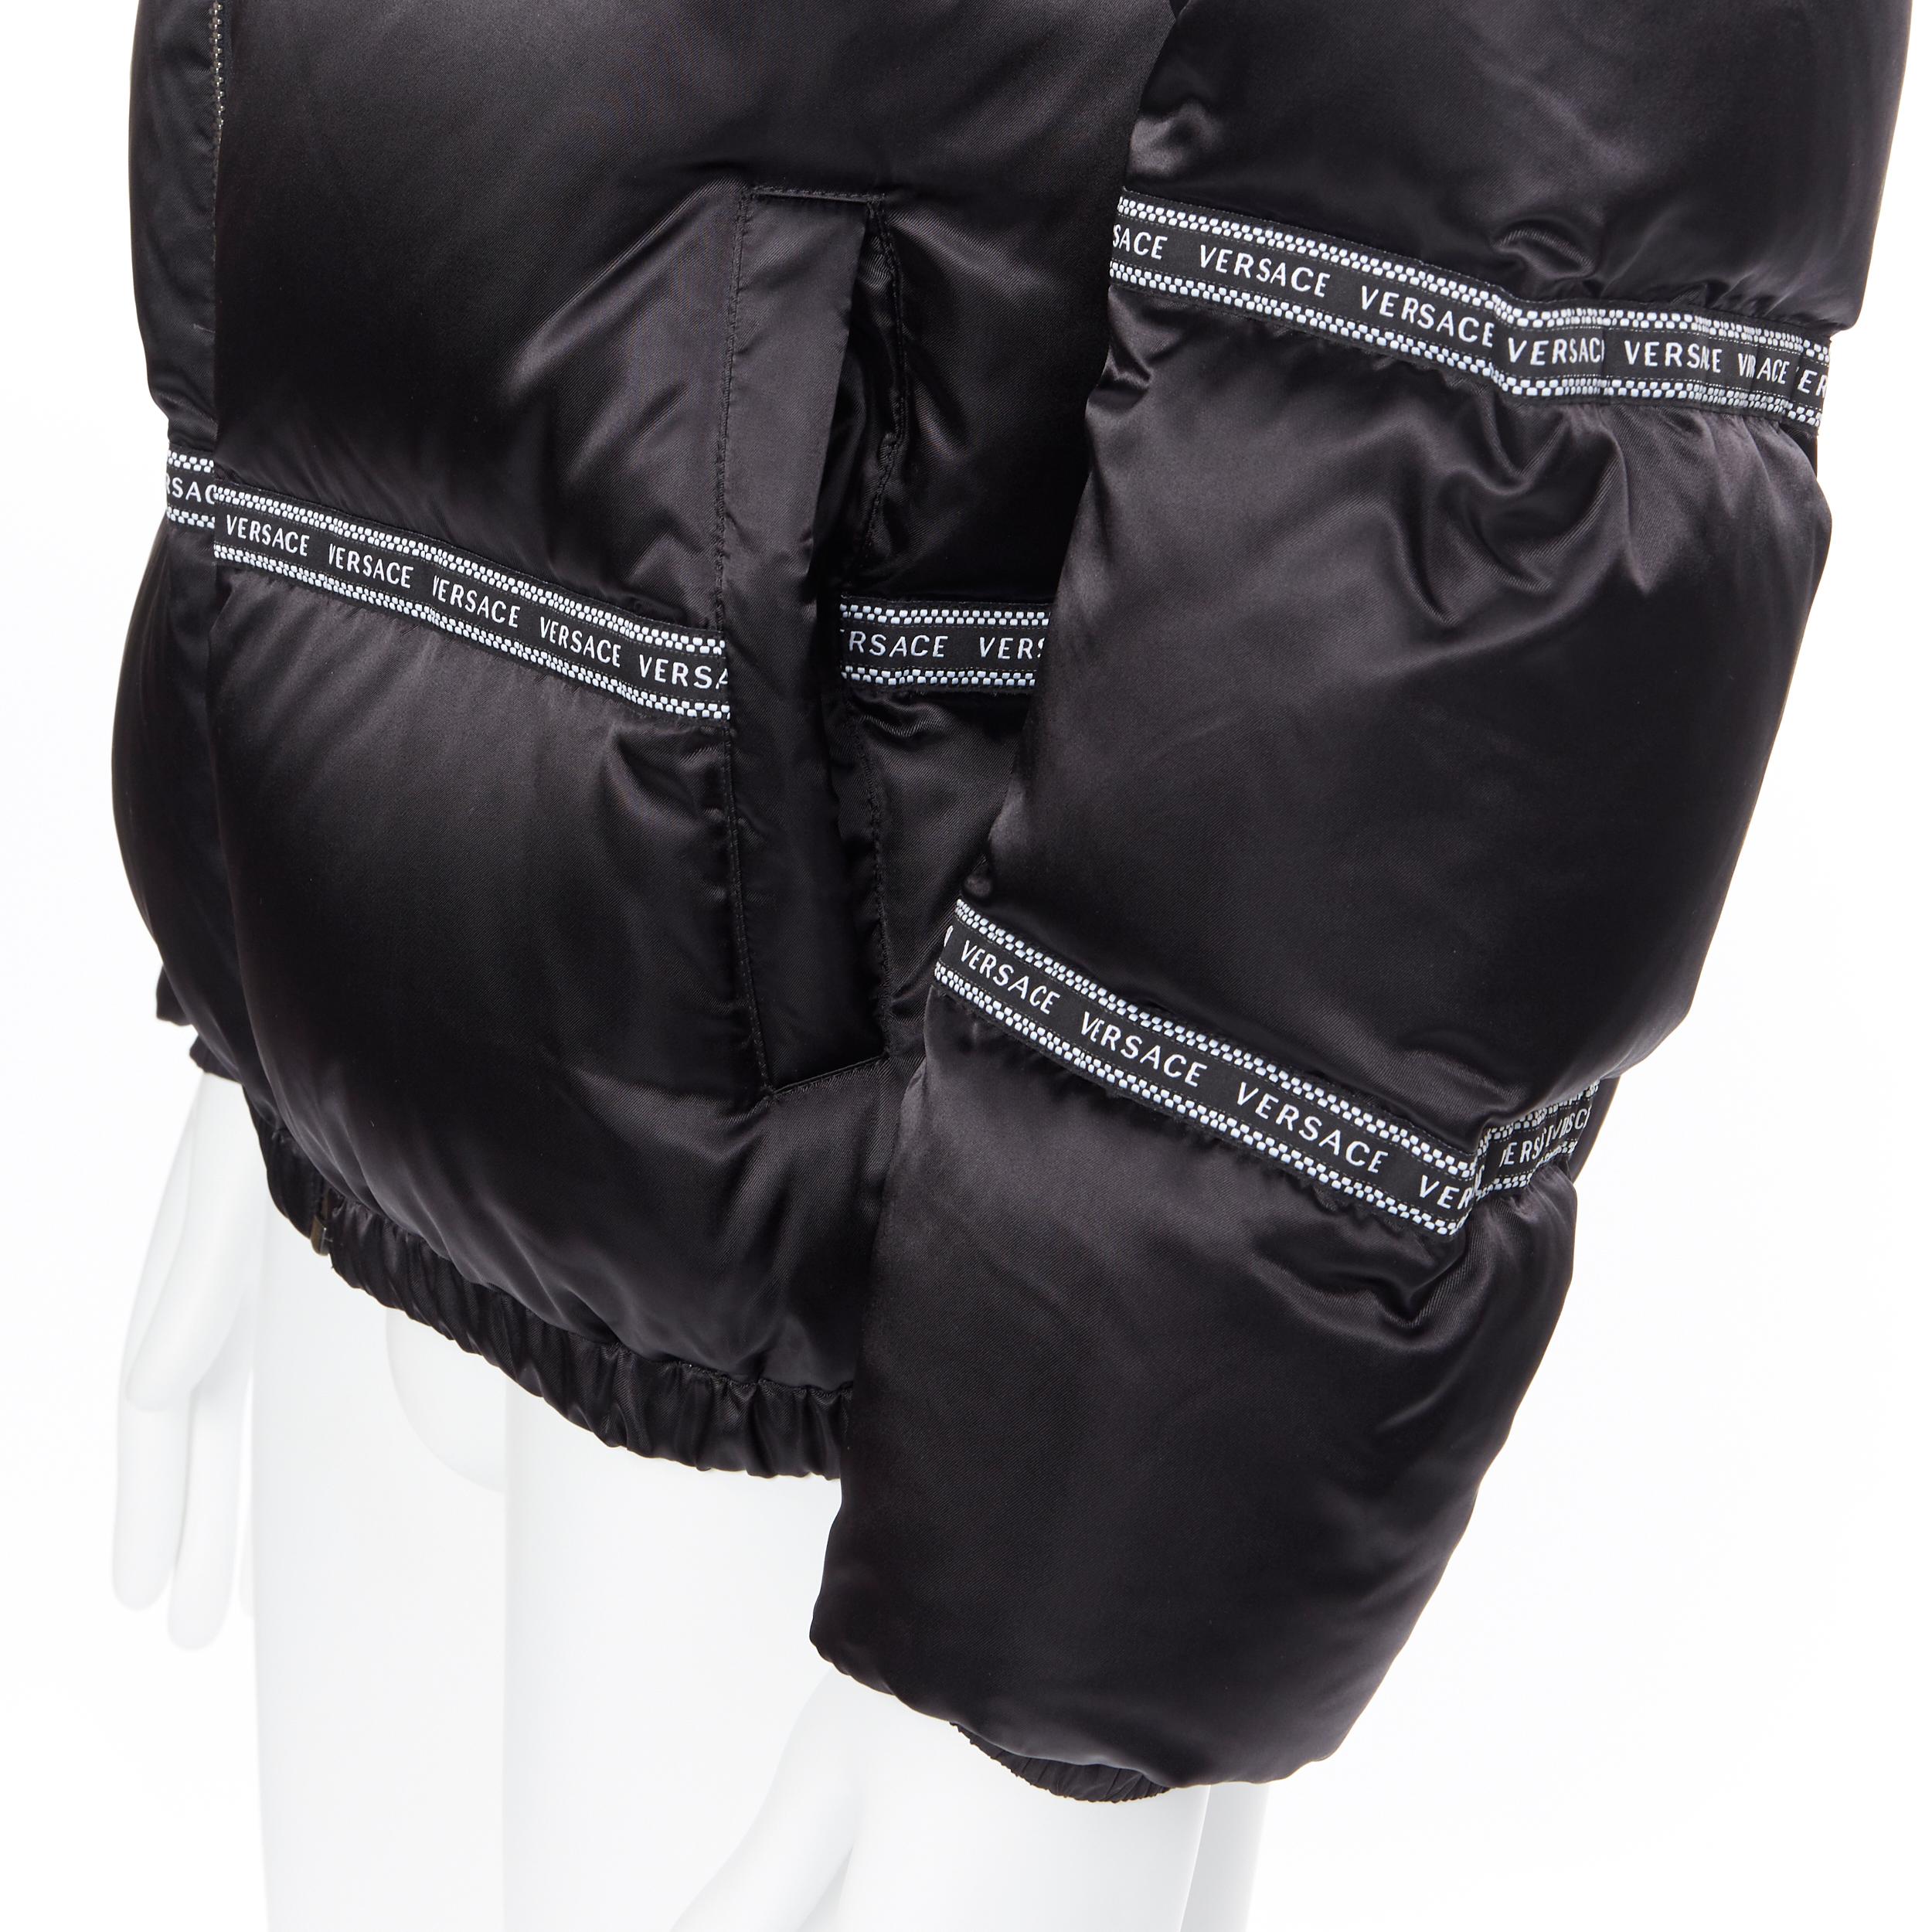 new VERSACE Nastro Stampa black logo ribbon goose down padded jacket IT46 S
Reference: TGAS/A05317
Brand: Versace
Designer: Donatella Versace
Collection: 2019
Material: Nylon
Color: Black
Pattern: Solid
Closure: Zip
Extra Detail: 90% goose down, 10%